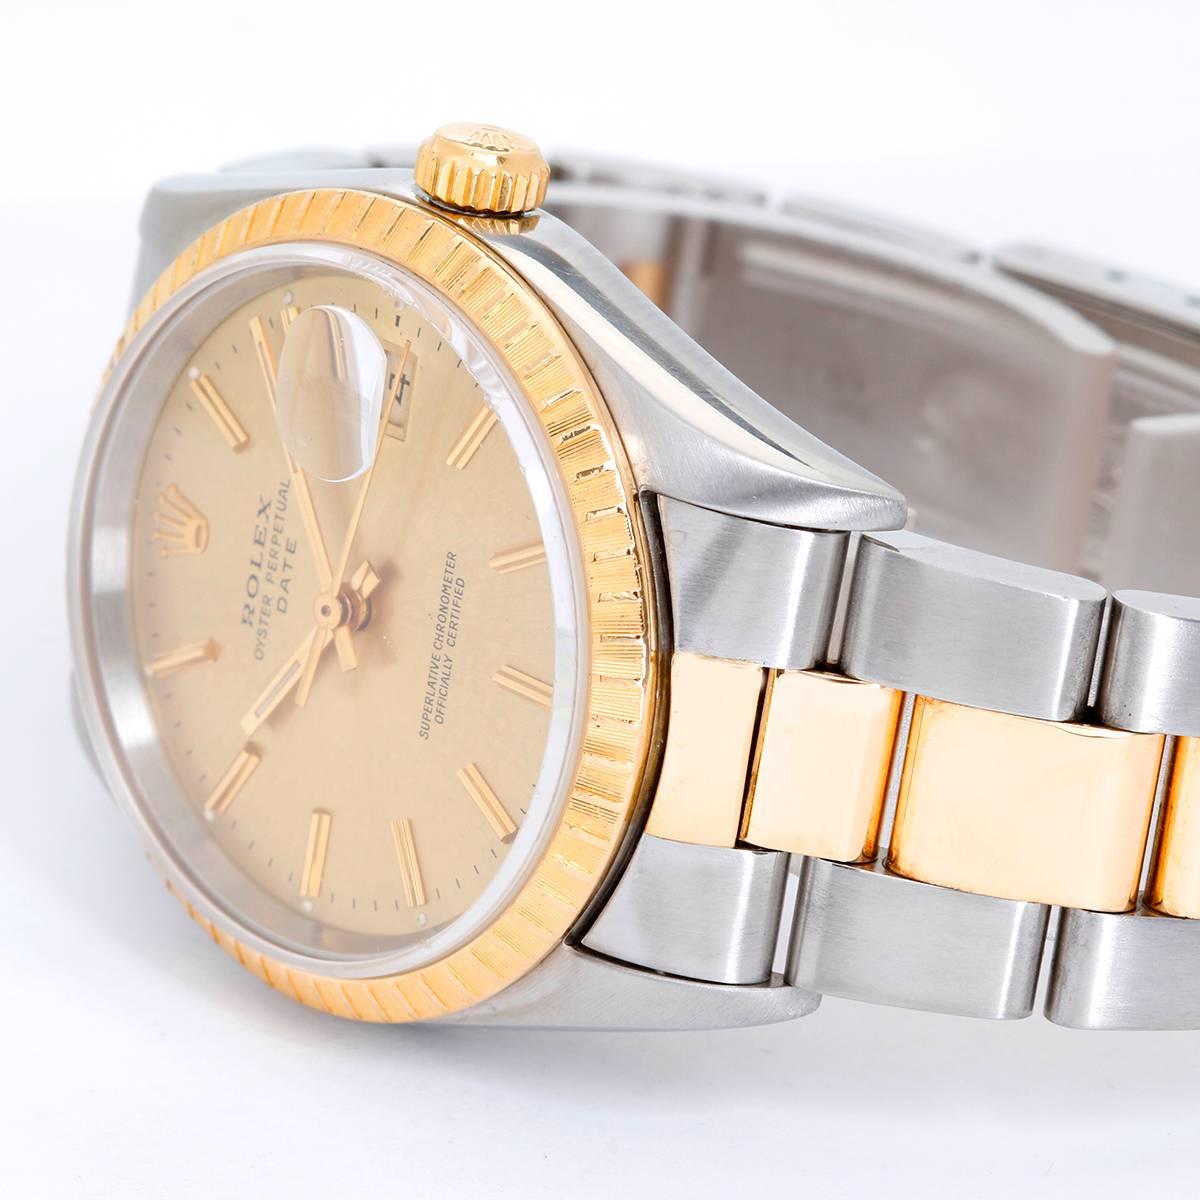 Rolex Date Men's 2-Tone Steel & Gold Watch 15223 -  Automatic winding, 31 jewels, Quickset, sapphire crystal. Stainless steel case with gold engine turned bezel (34mm diameter). Champagne dial with stick markers. Stainless steel and 18k yellow